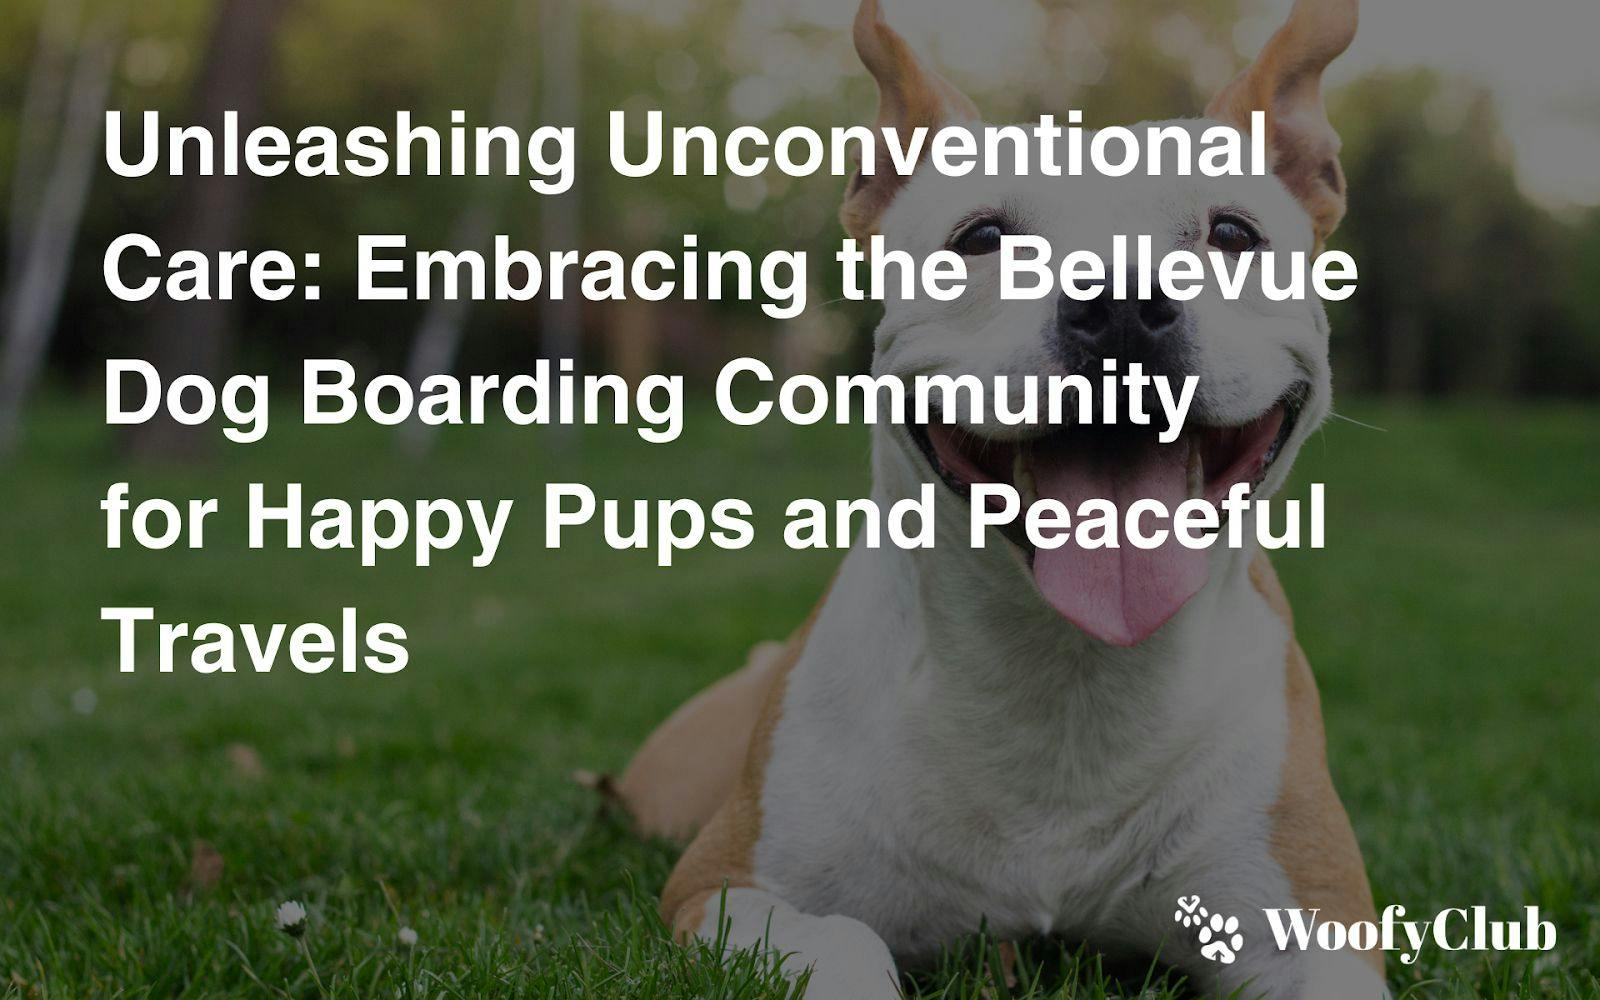 Unleashing Unconventional Care: Embracing The Bellevue Dog Boarding Community For Happy Pups And Peaceful Travels